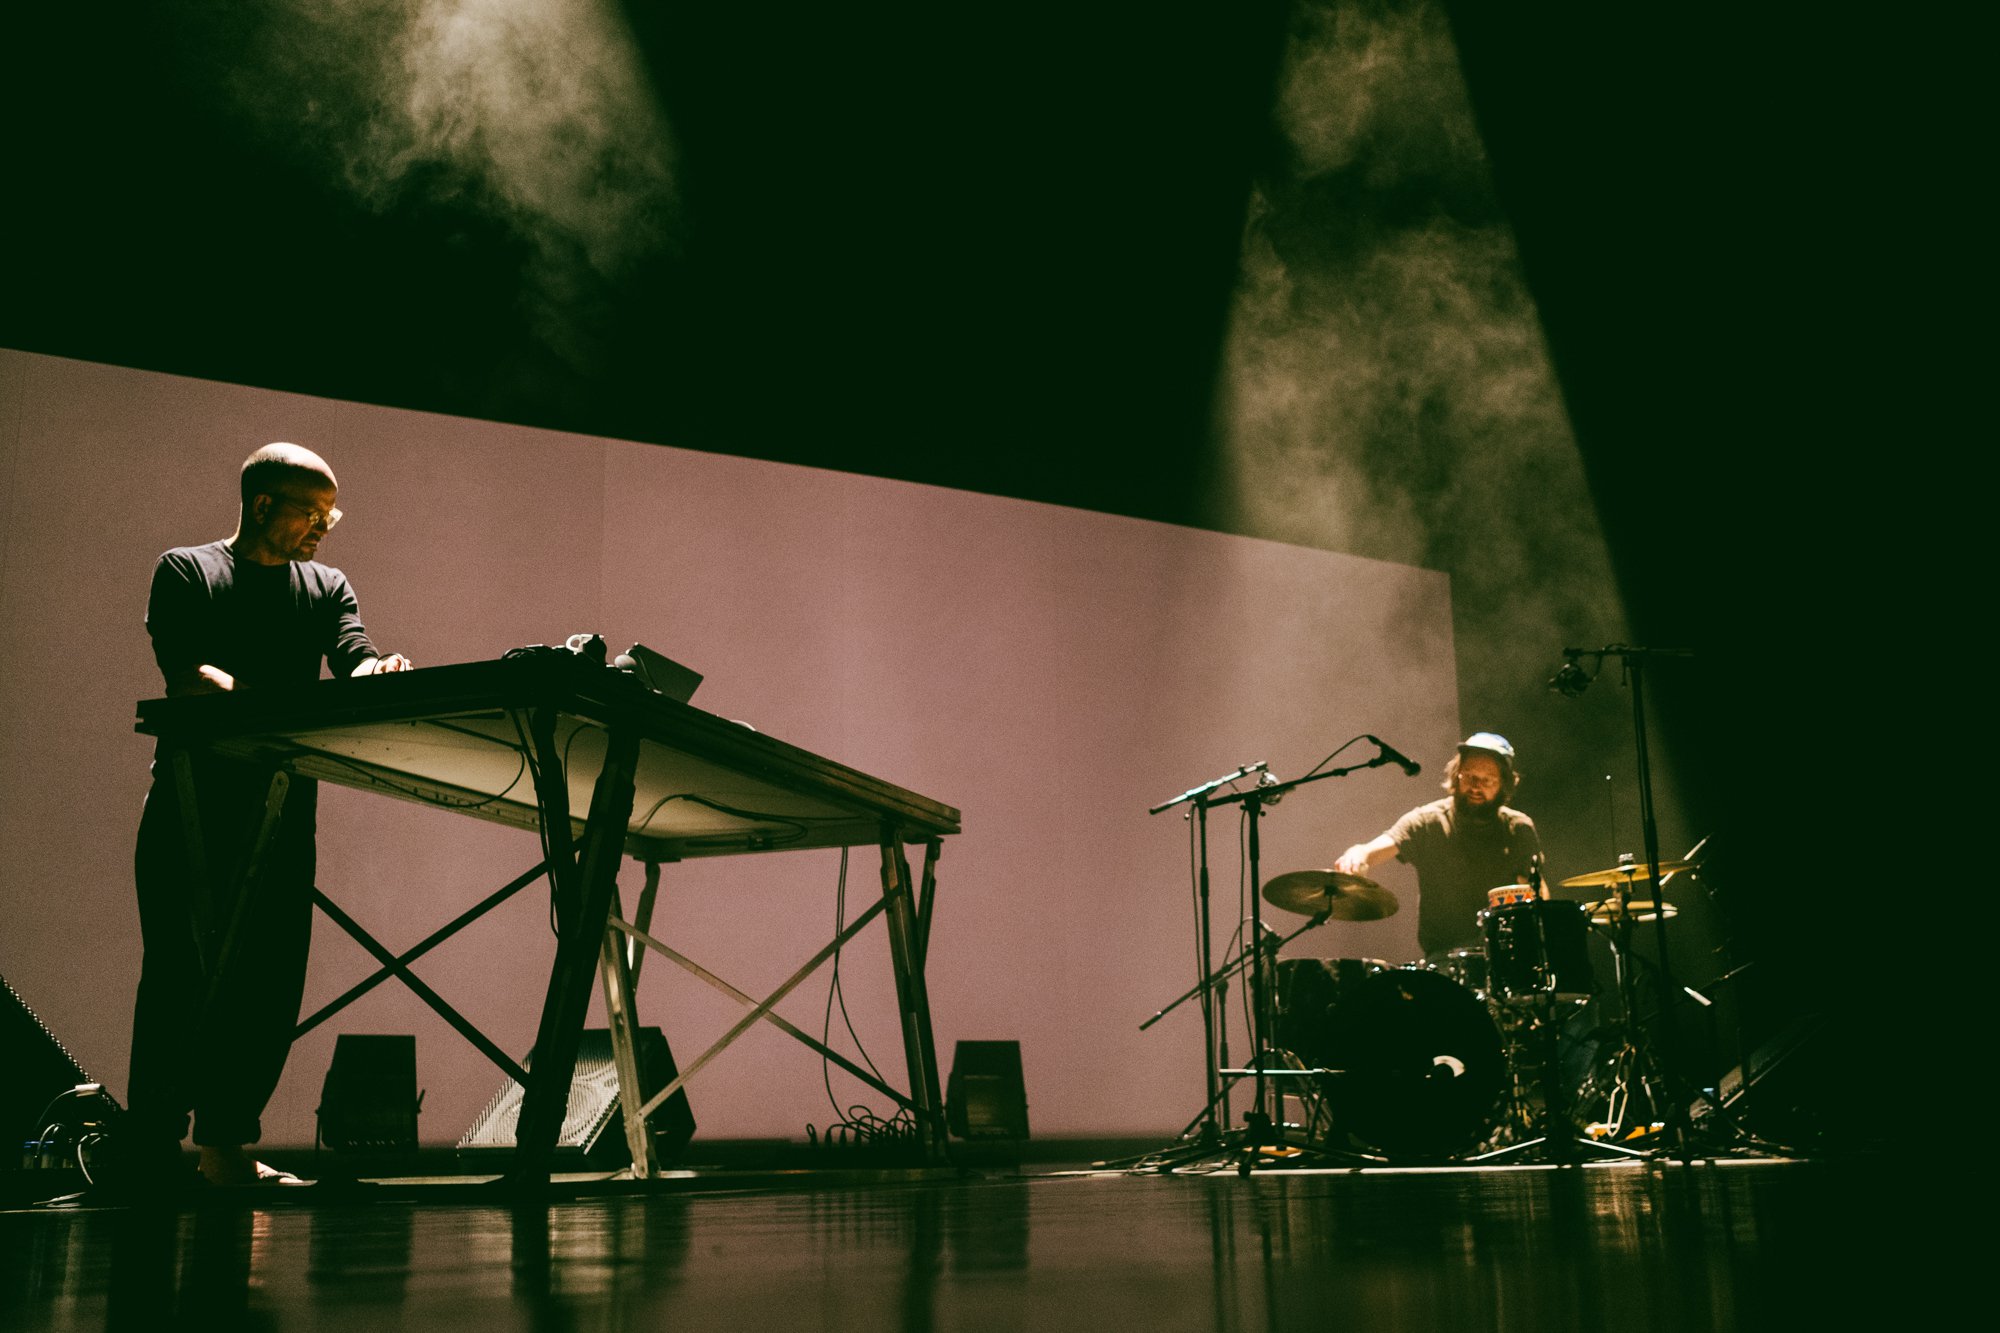 MATTHEW HERBERT & JULIAN SARTORIUS | DRUM SOLO | 22 NOV 23
> The night we witnessed on stage the dialogue between two gifted musicians who showed us the supreme art of live sampling.
Photography: Vera Marmelo - Culturgest